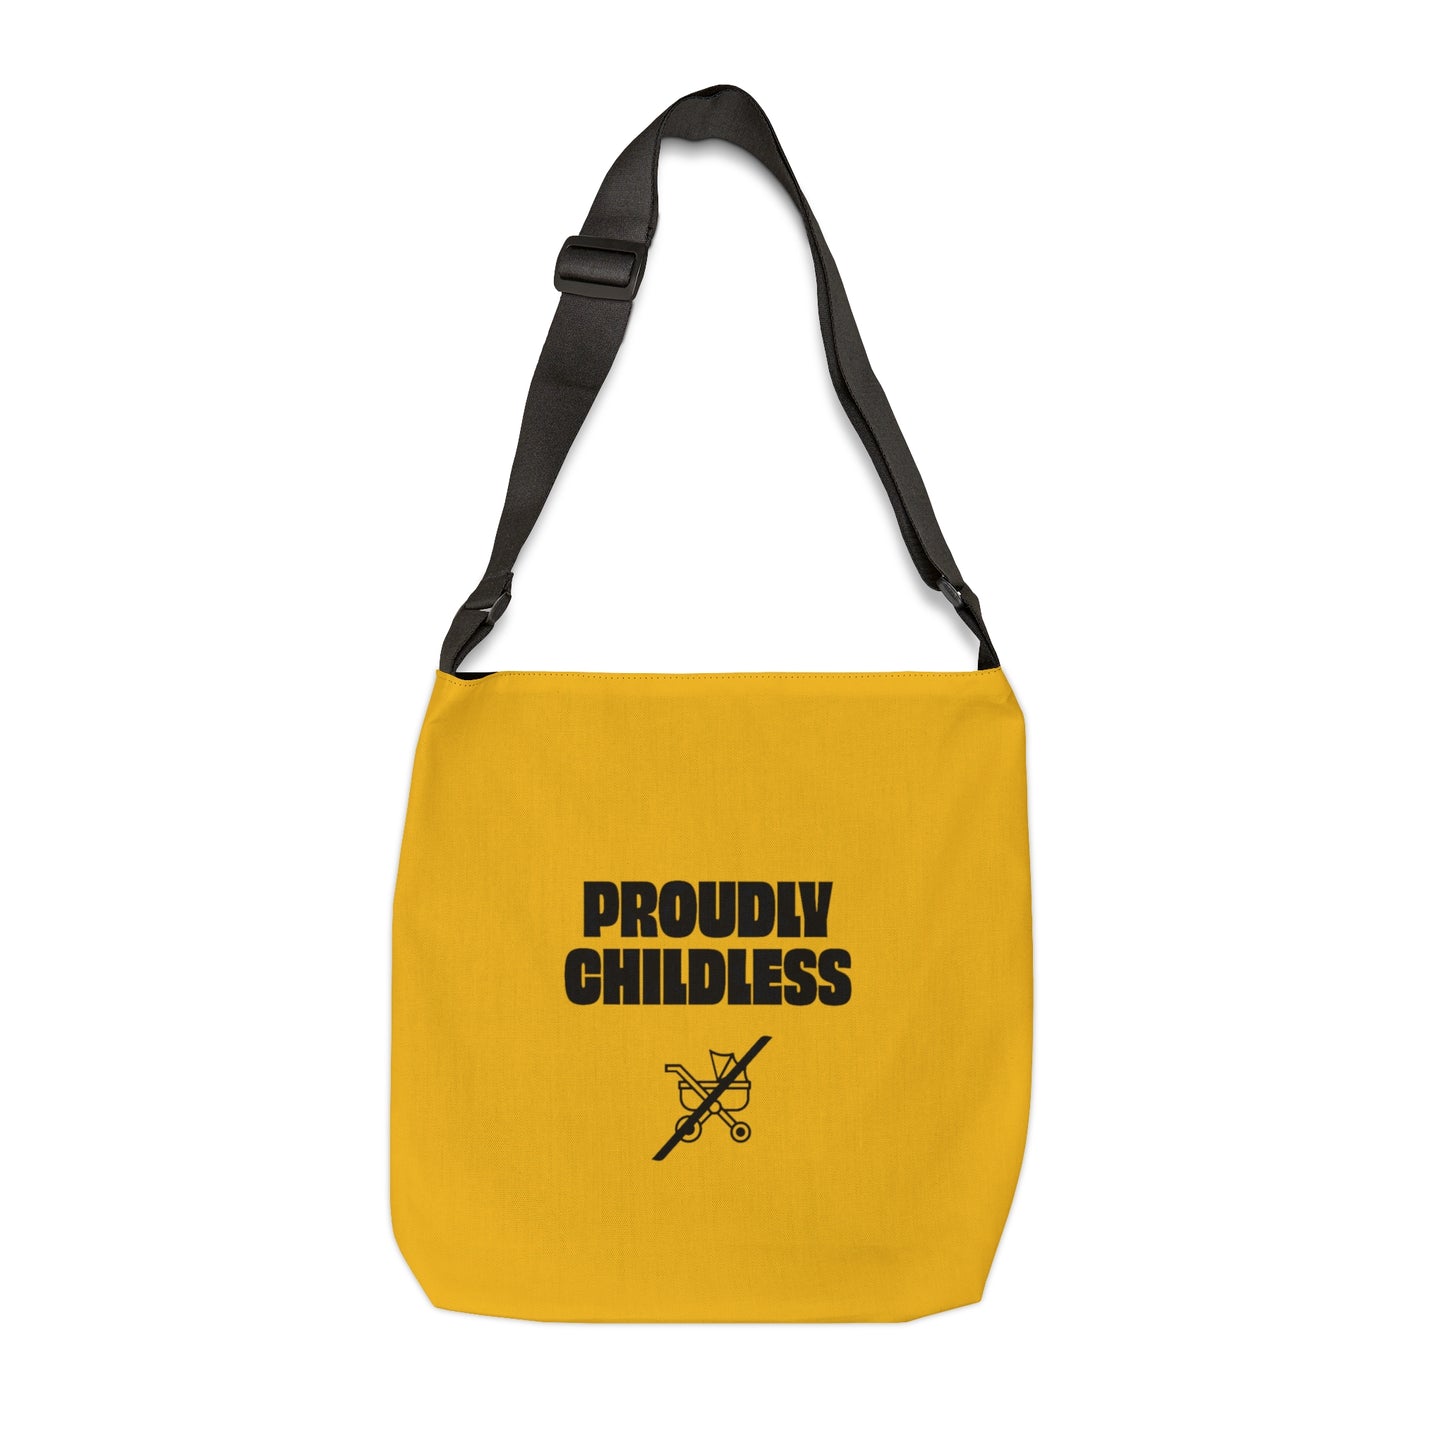 Proudly Childless Adjustable Tote Bag